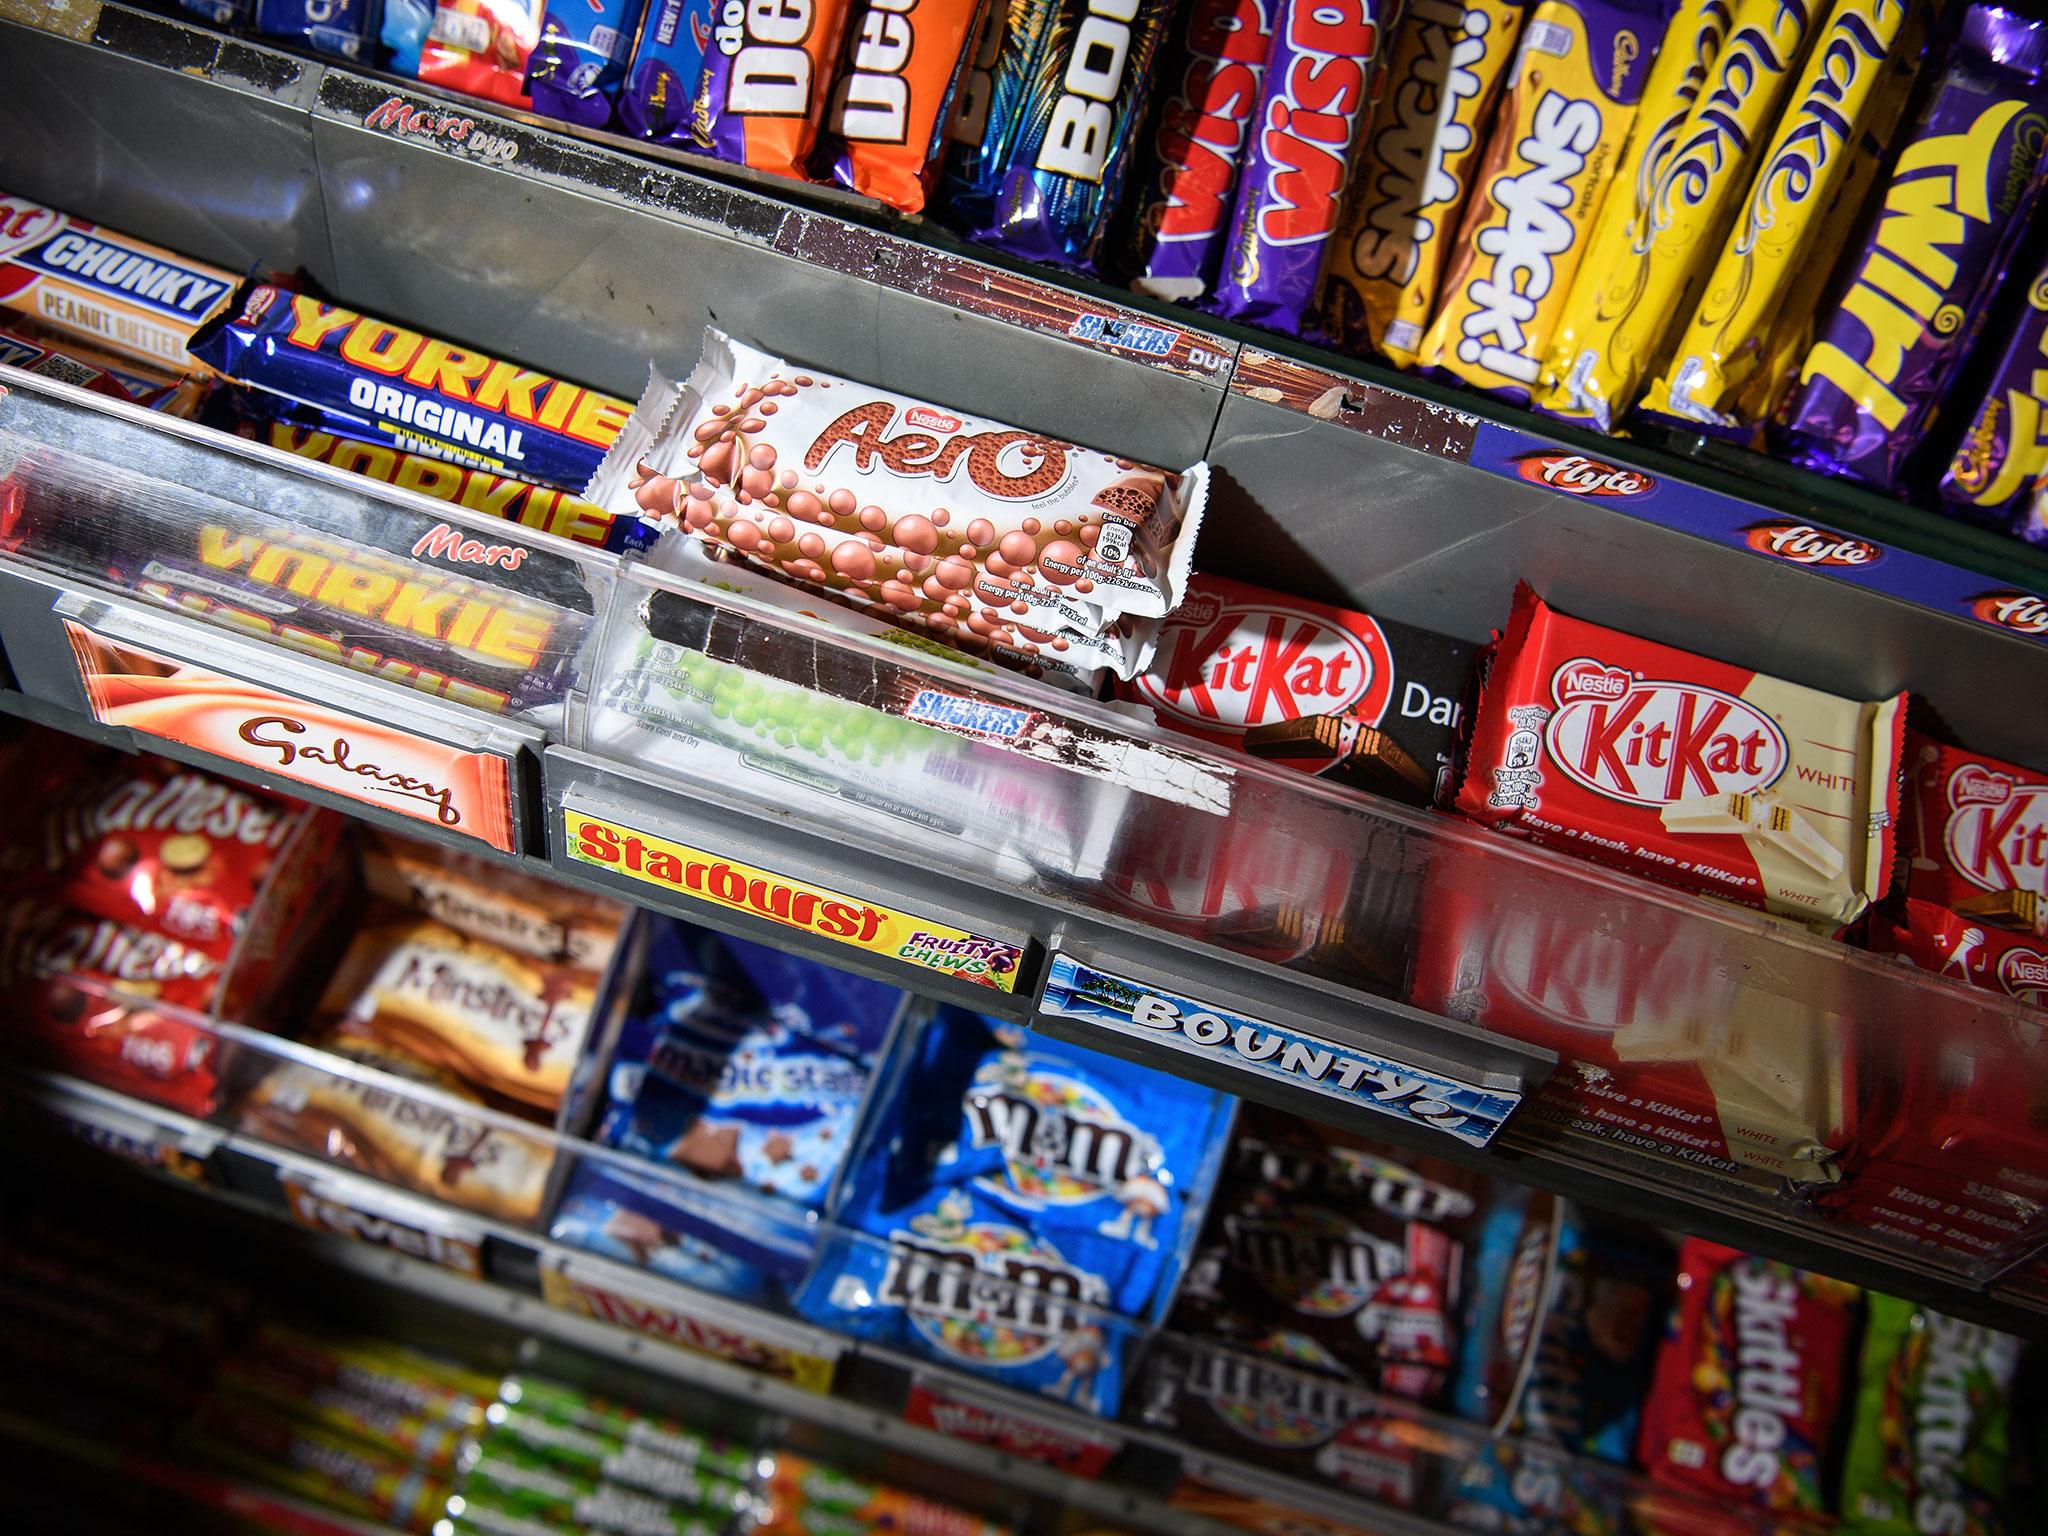 There are no plans to change the £1.50 price tag of the Maltesers, M&amp;M's and Minstrels price tags